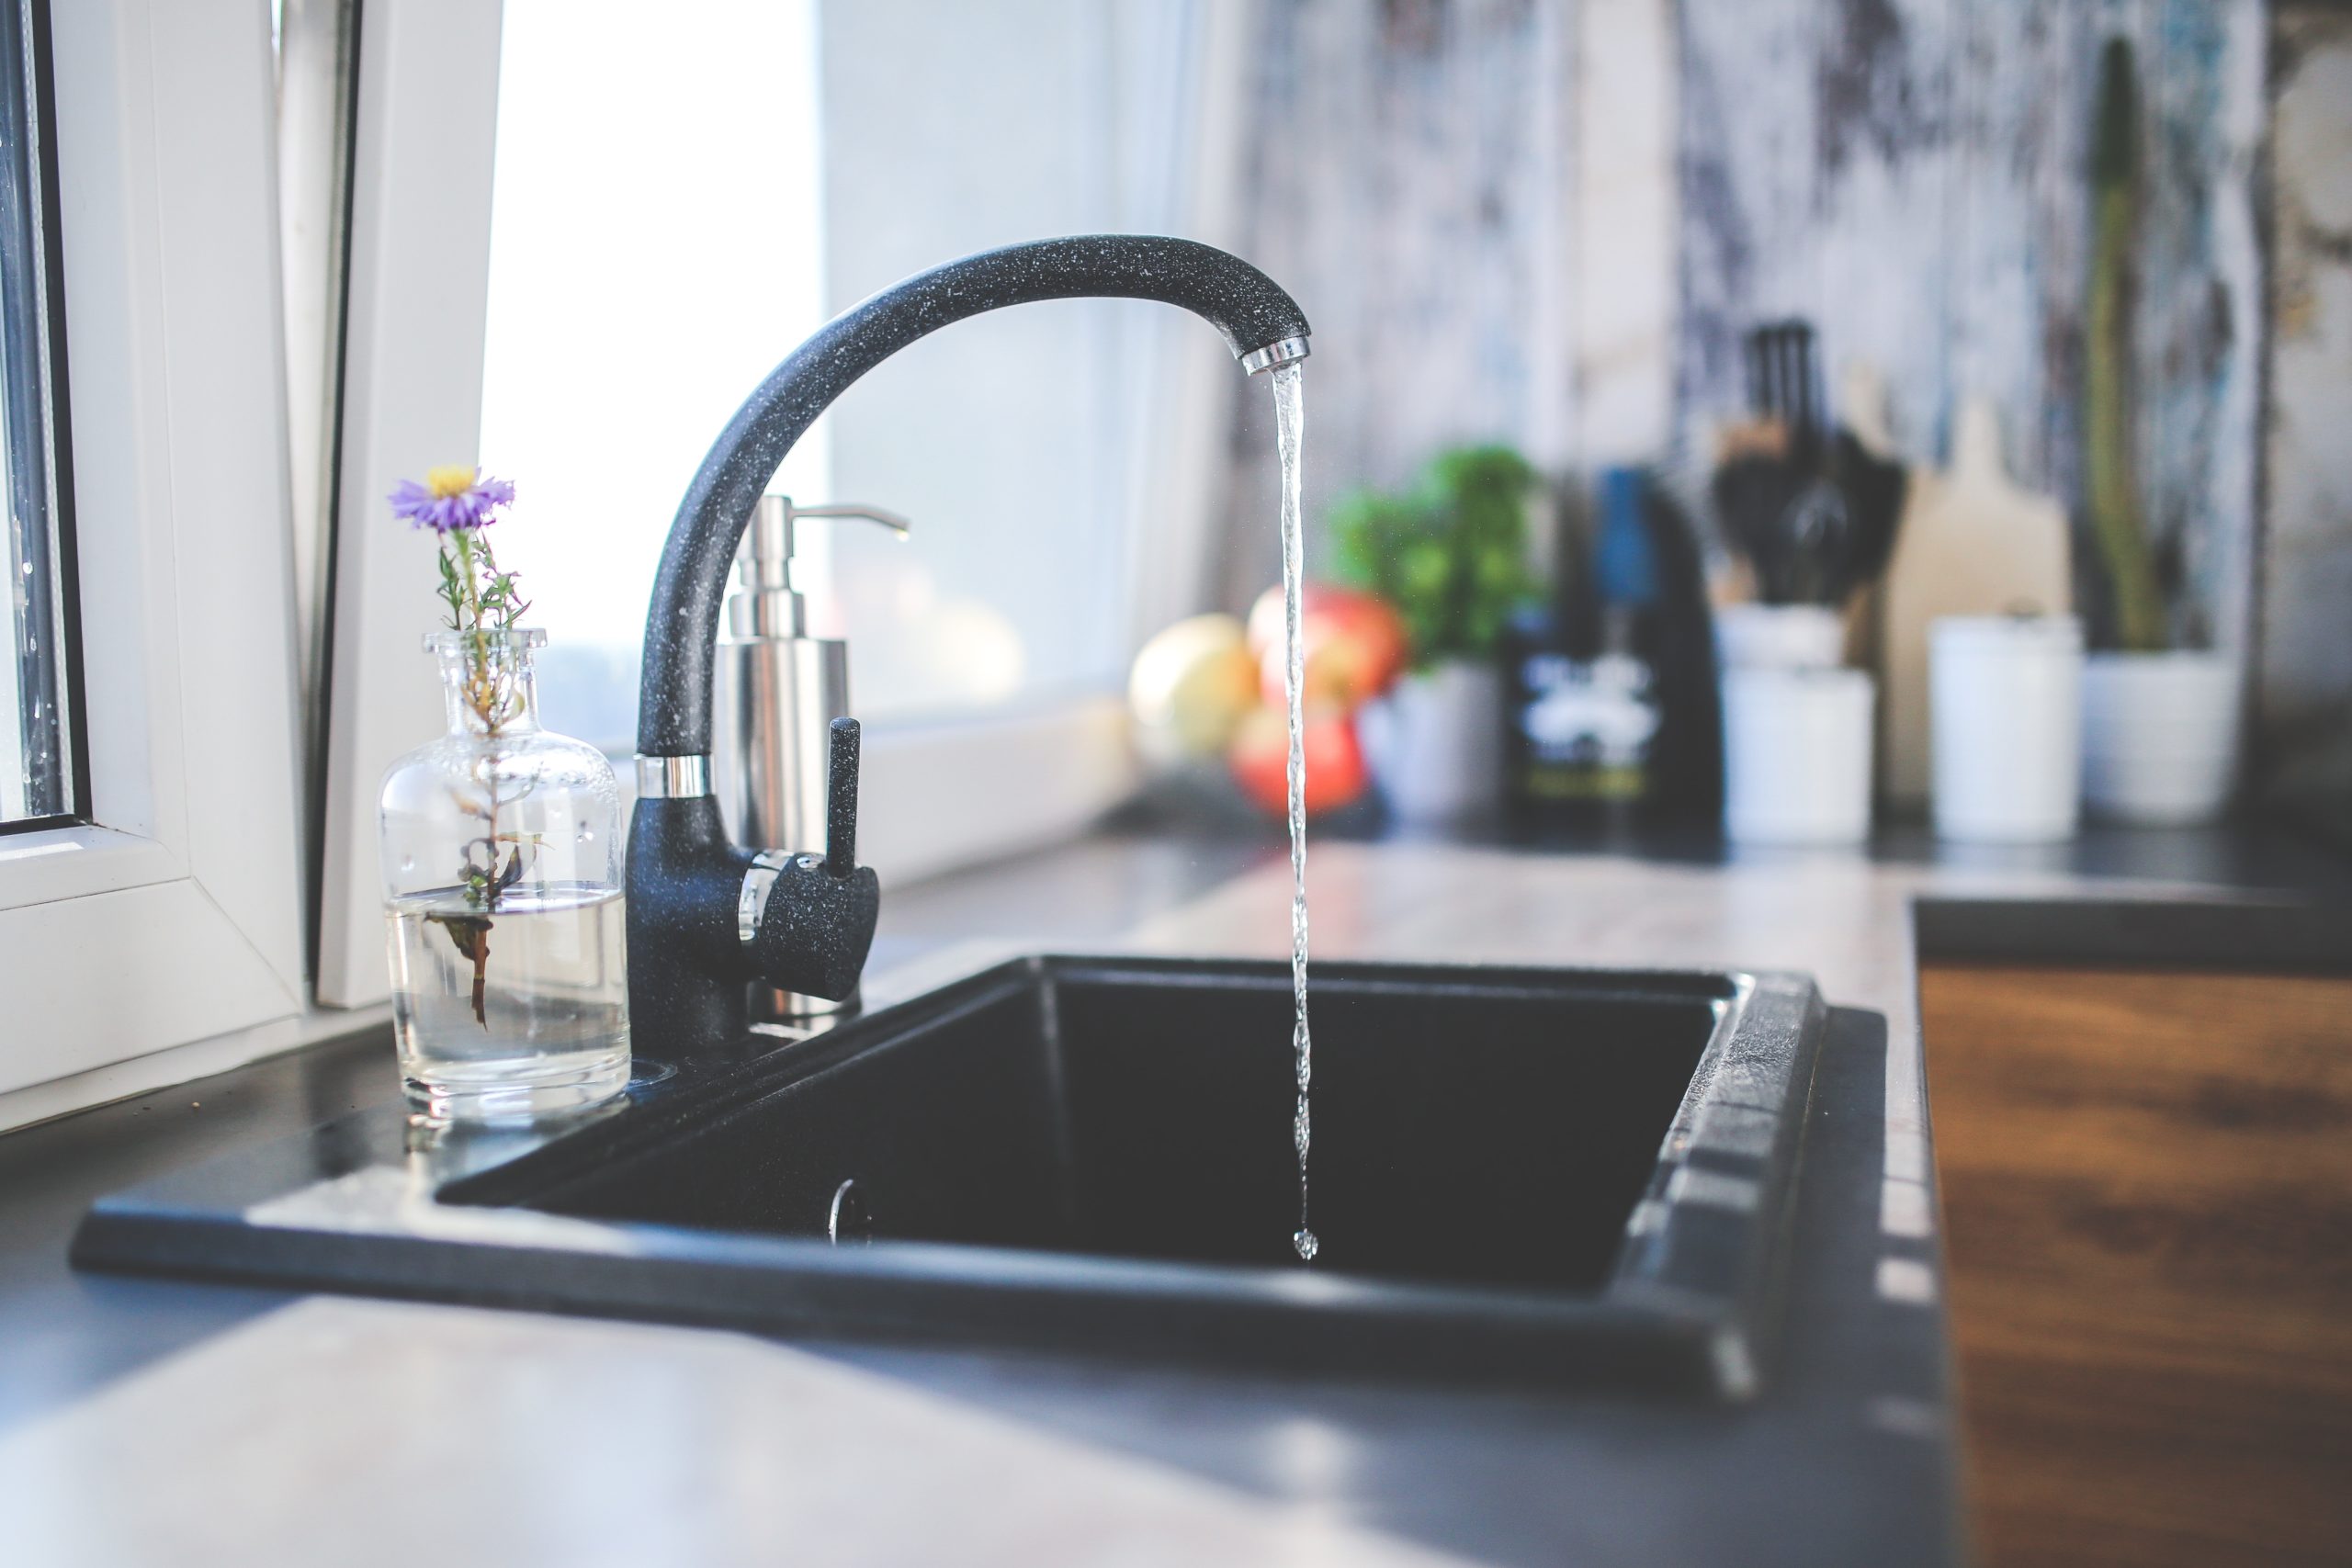 turn the tap in the kitchen off to save water